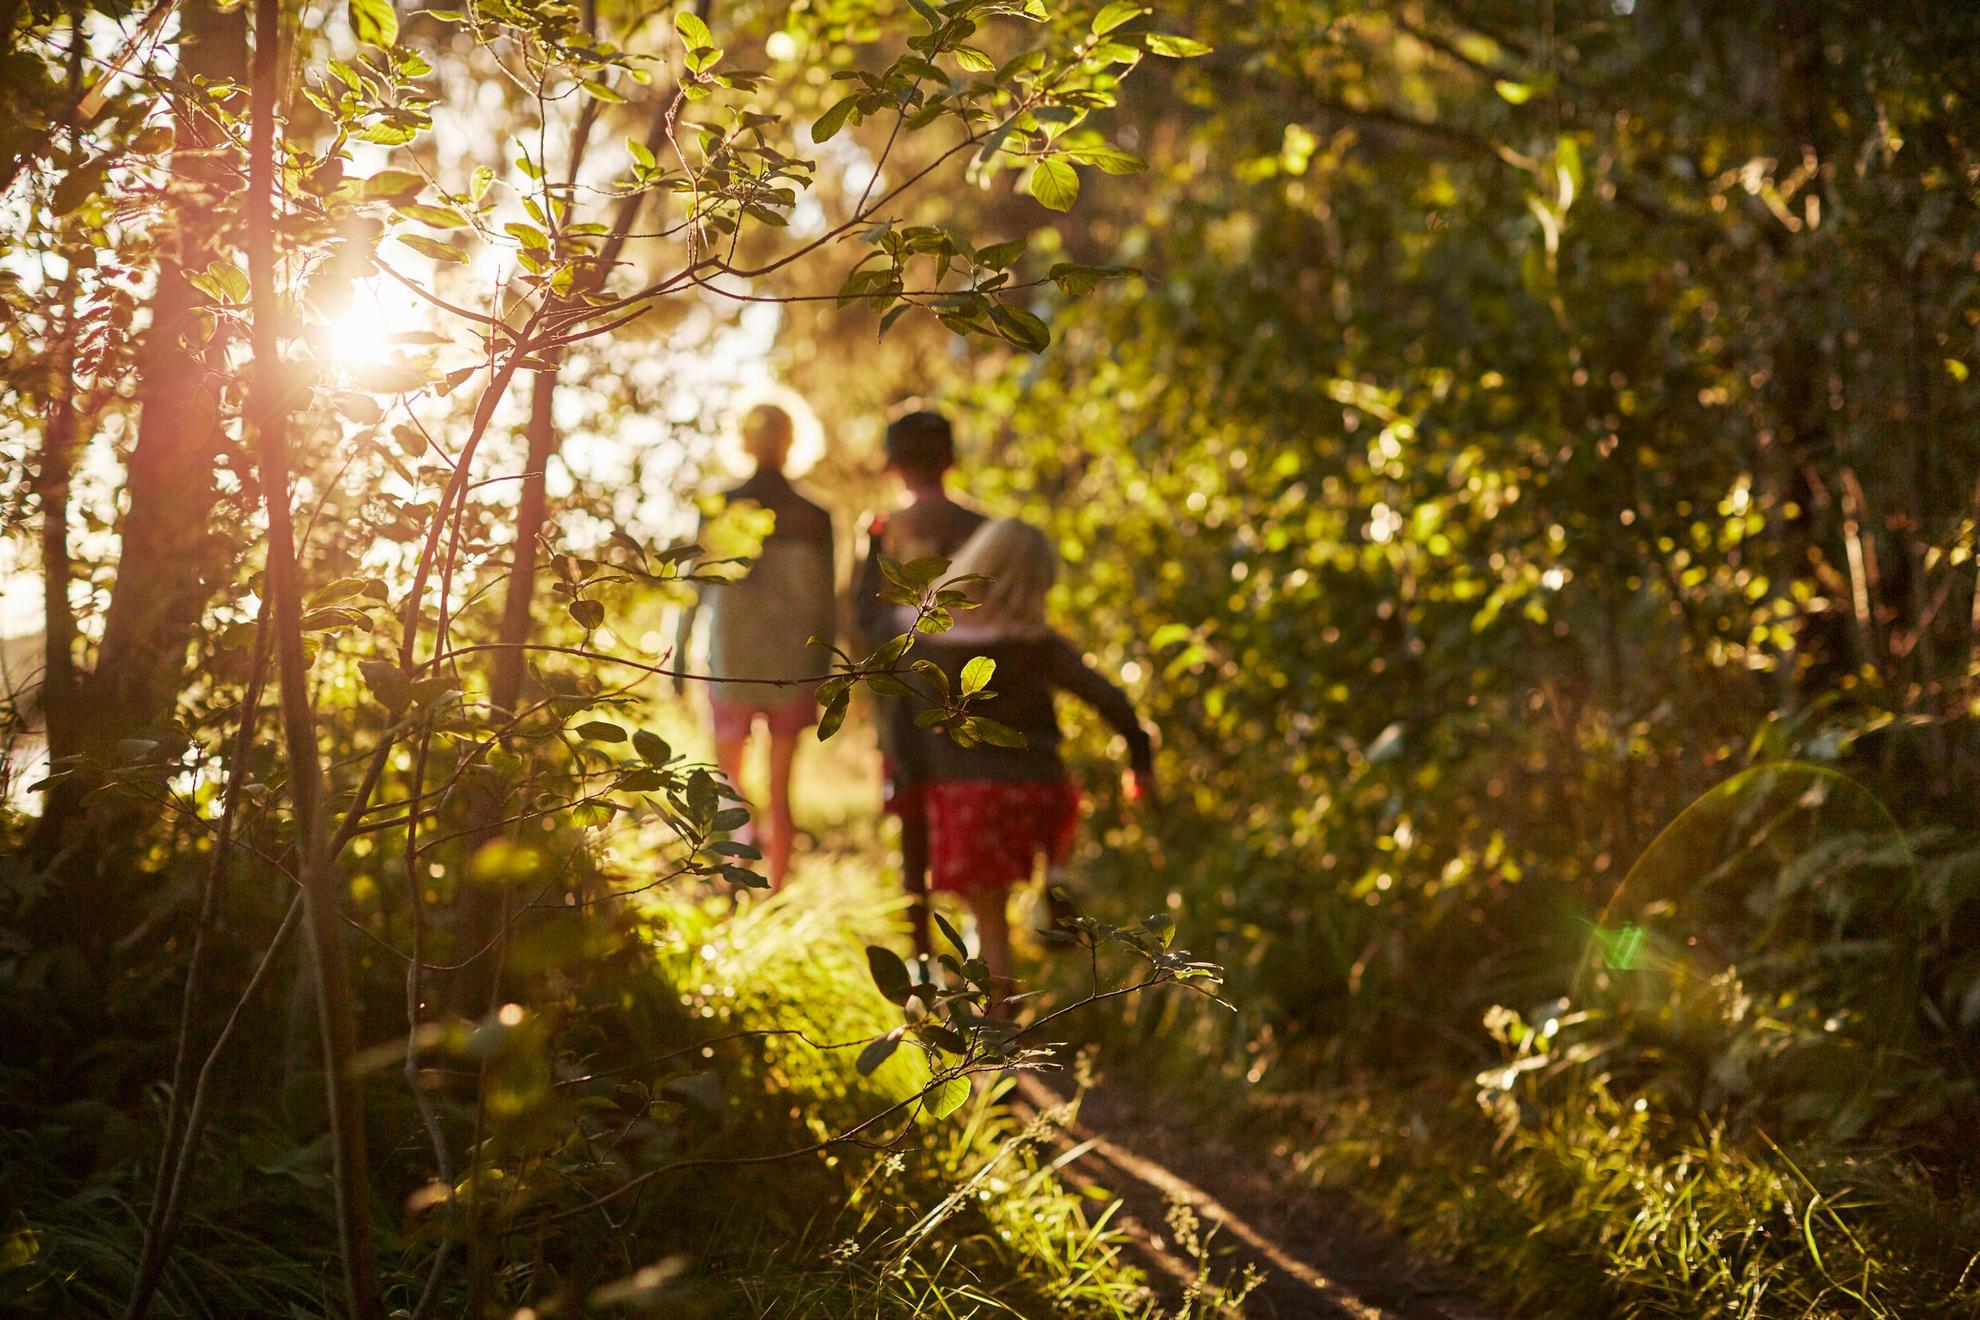 The sun is shining through the vegetation in a forest where three kids are walking.